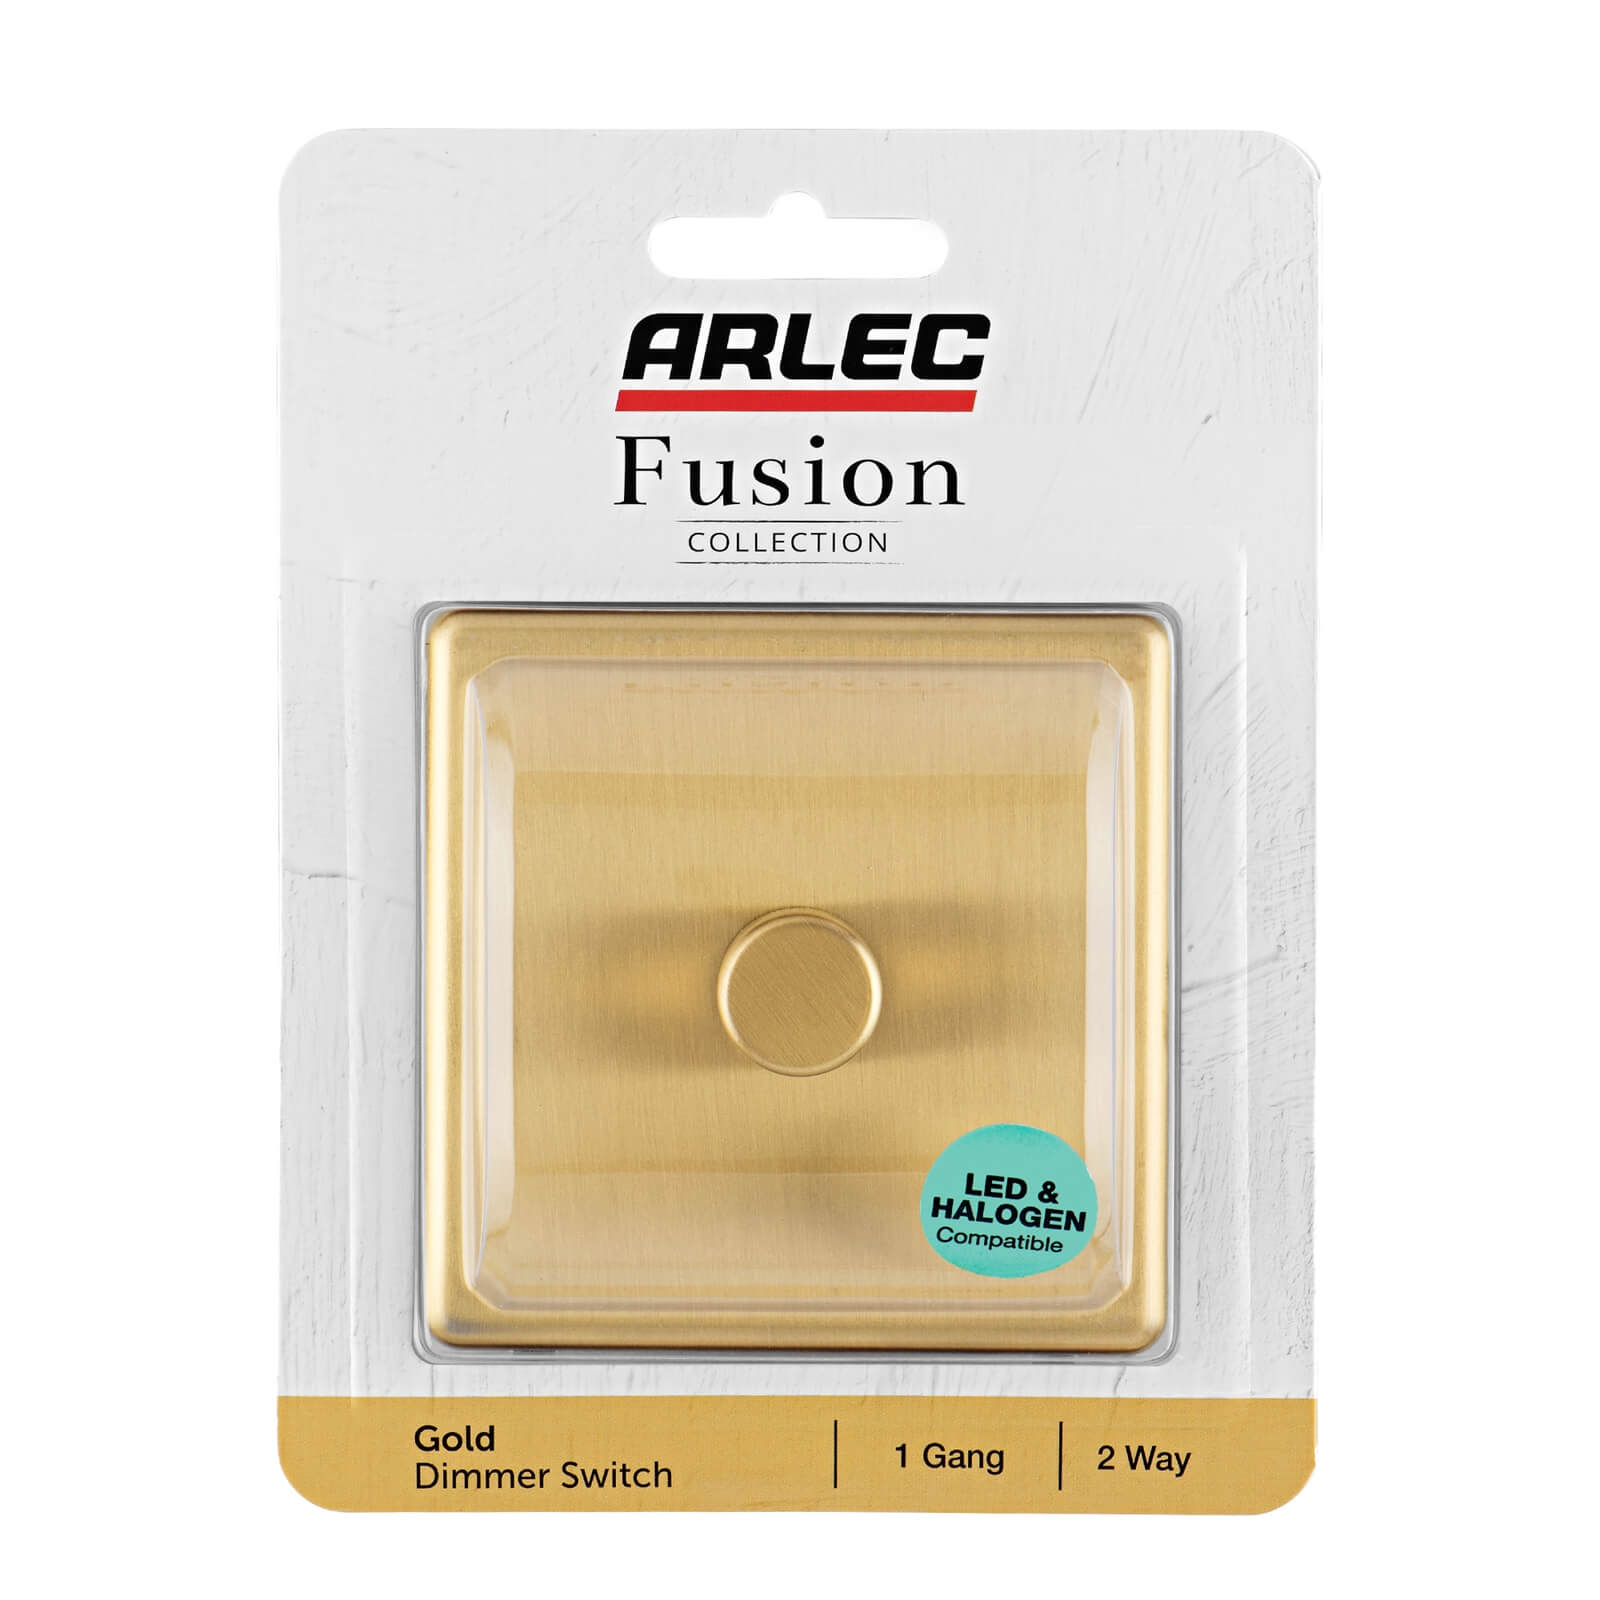 Arlec Fusion 1 Gang 2 Way Gold Dimmer switch